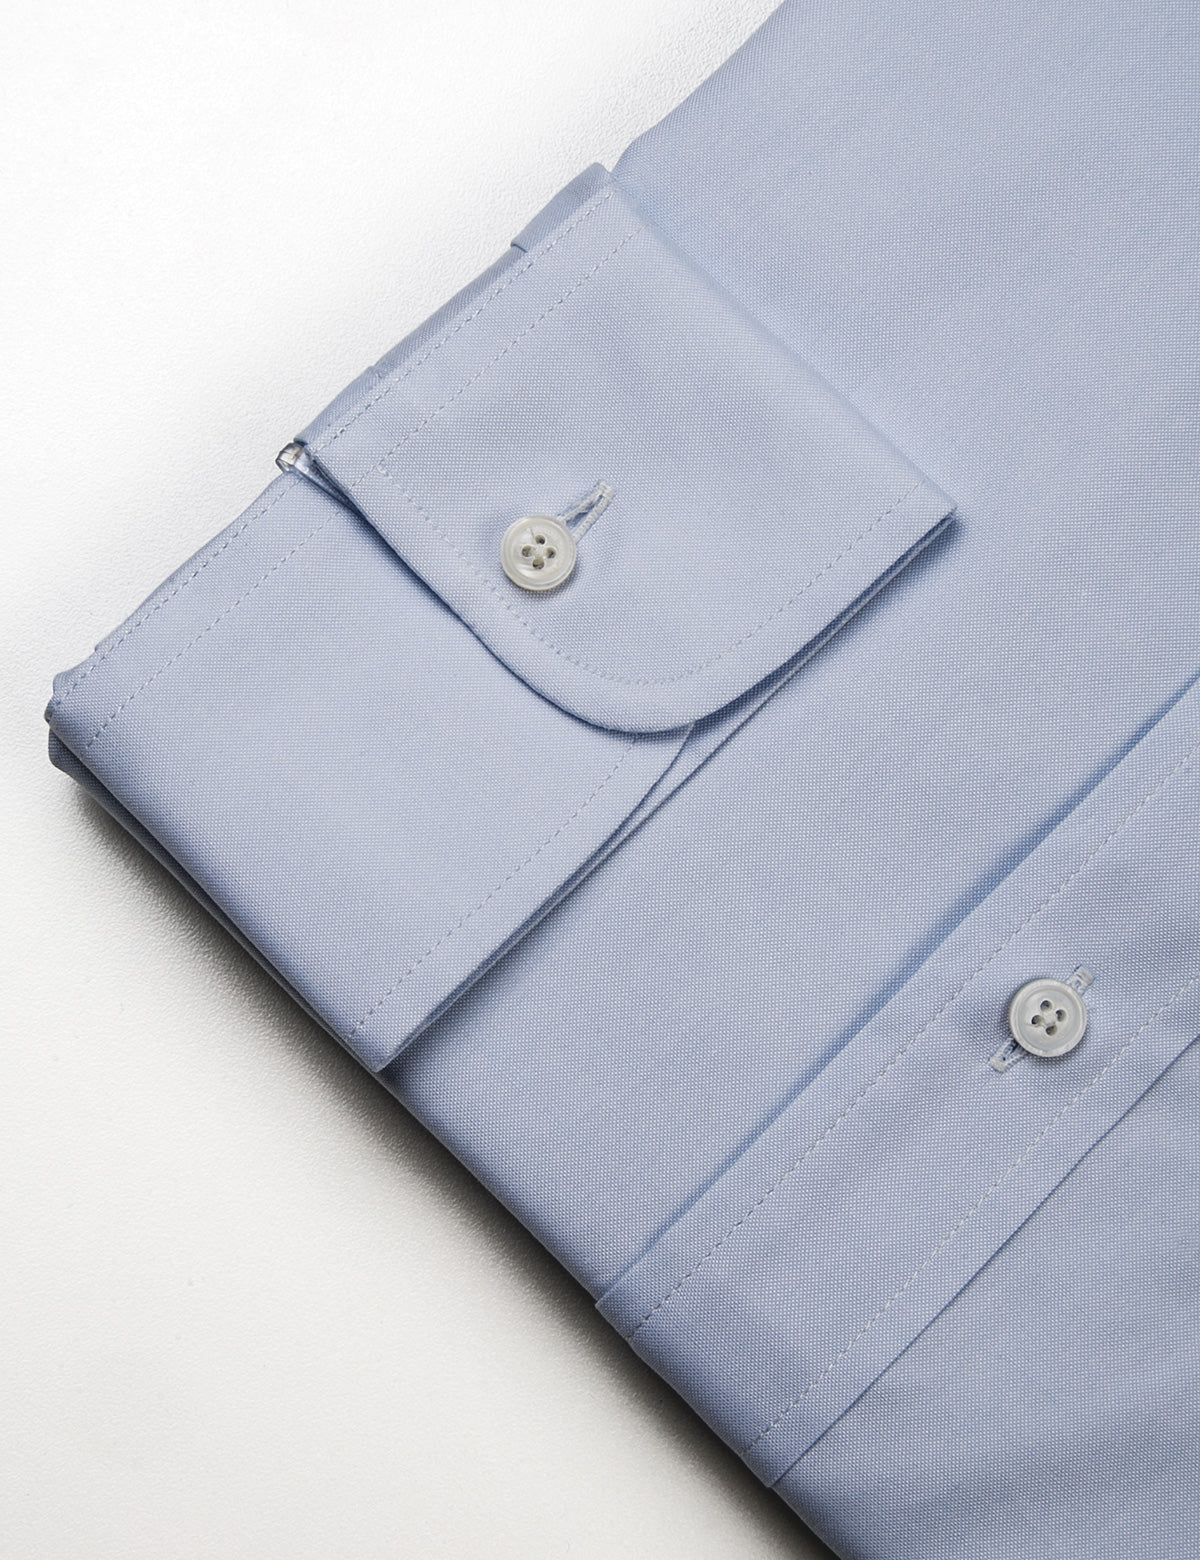 Detail shot of collar, buttons, and fabric texture on Brooklyn Tailors BKT20 Slim Dress Shirt in Pinpoint Oxford - Light Blue